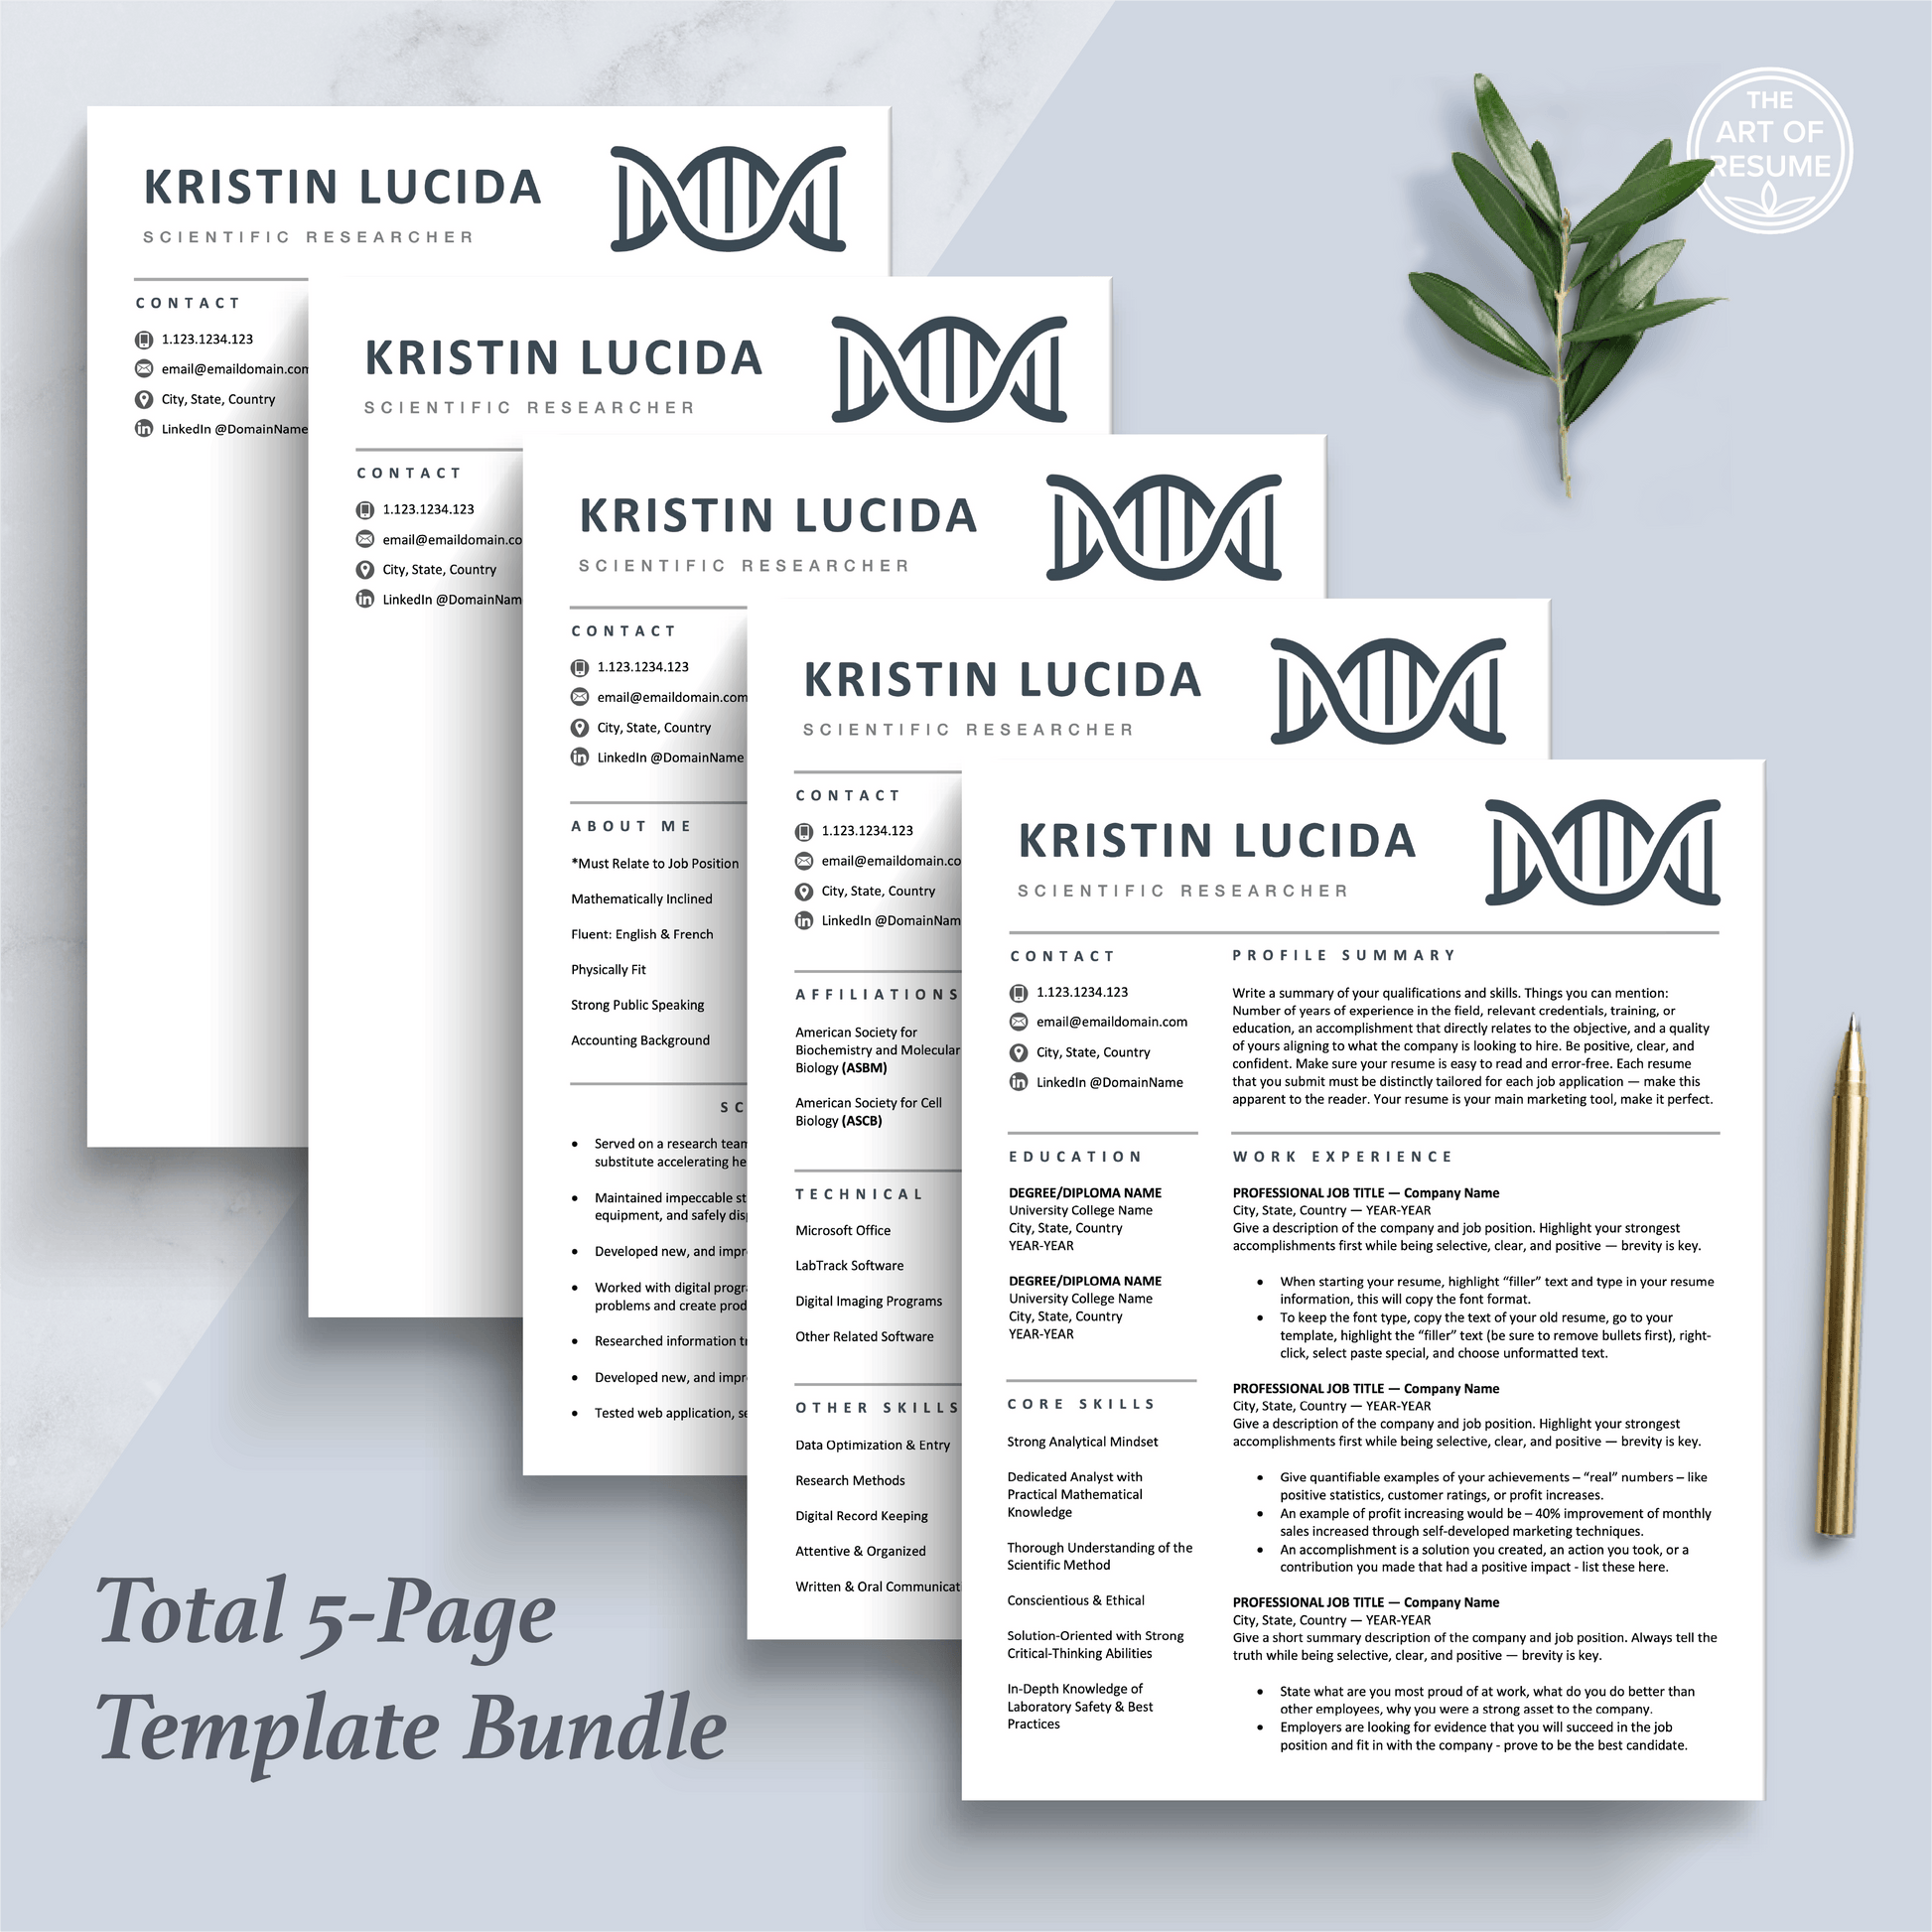 The Art of Resume Templates |  Scientist, Biochemist, Lab Researcher, Student, Teacher DNA Helix  Resume CV Design Bundle including matching cover letter and reference page